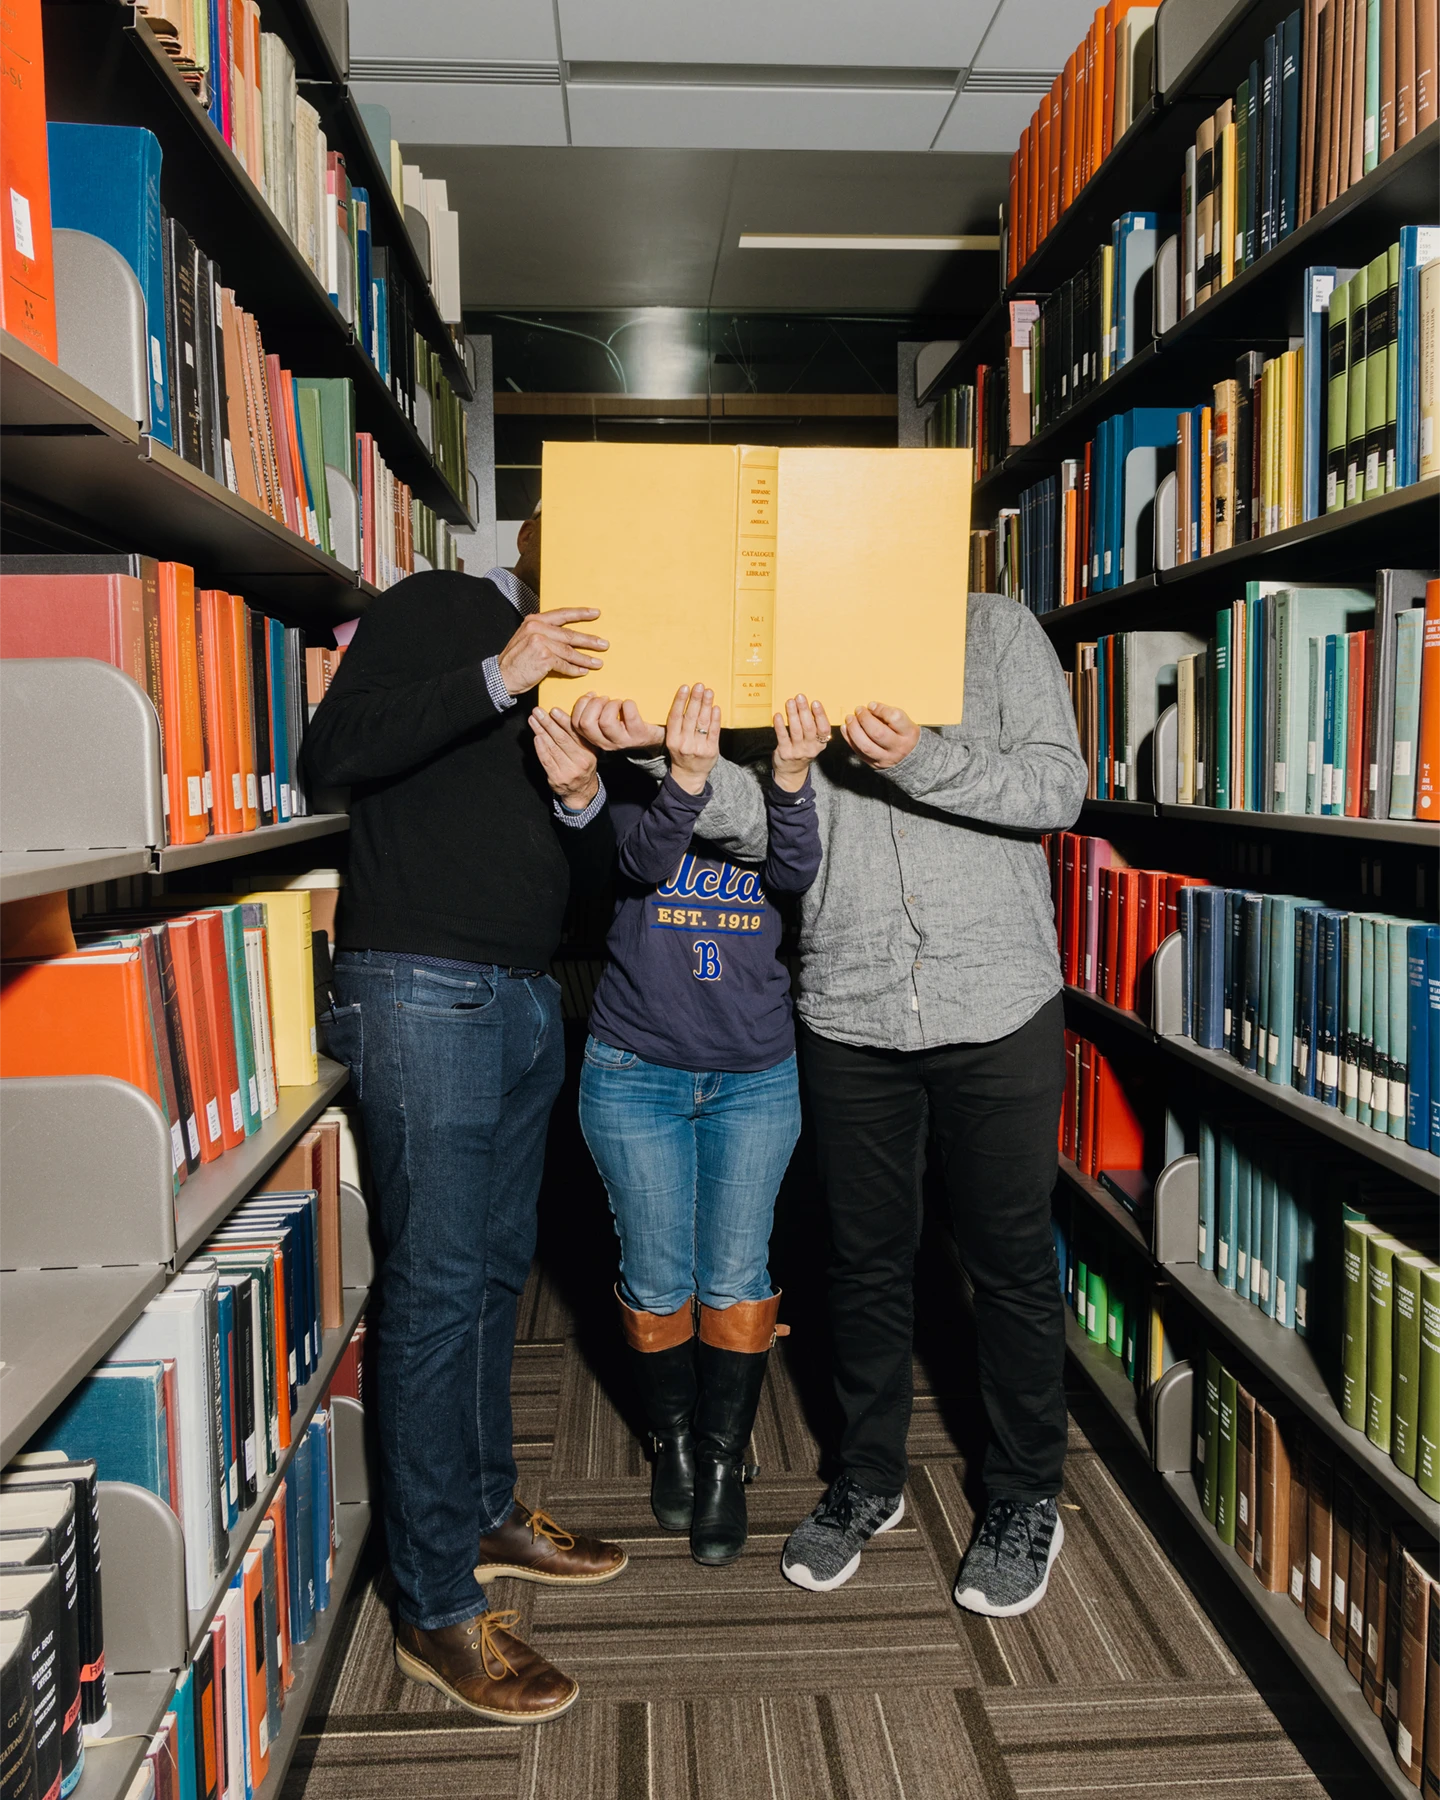 Three students in a college library stand in the stacks of books with a large book covering their faces